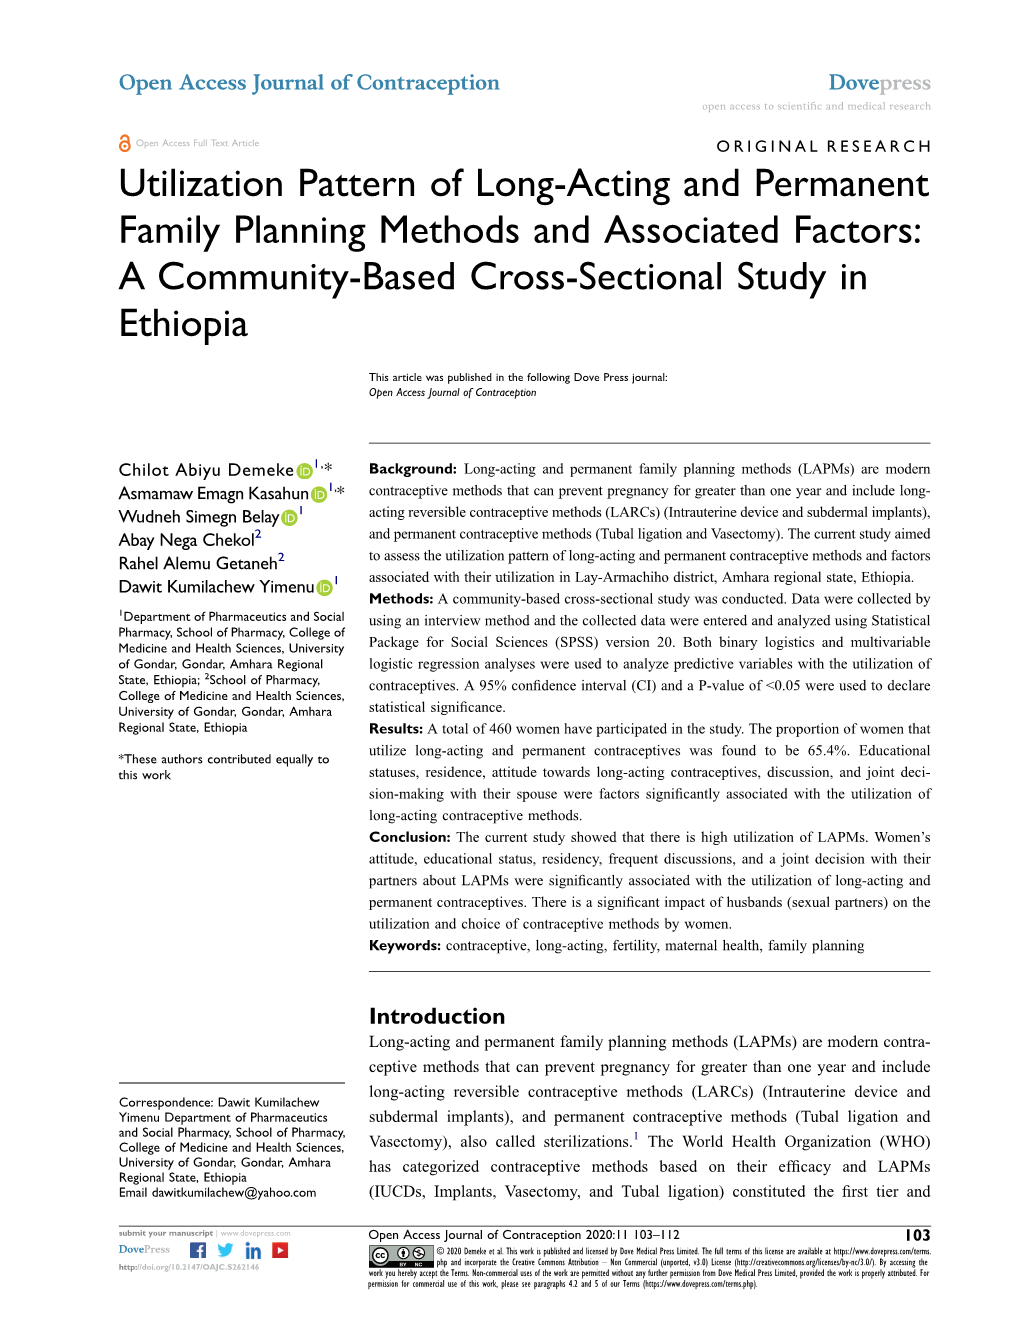 Utilization Pattern of Long-Acting and Permanent Family Planning Methods and Associated Factors: a Community-Based Cross-Sectional Study in Ethiopia